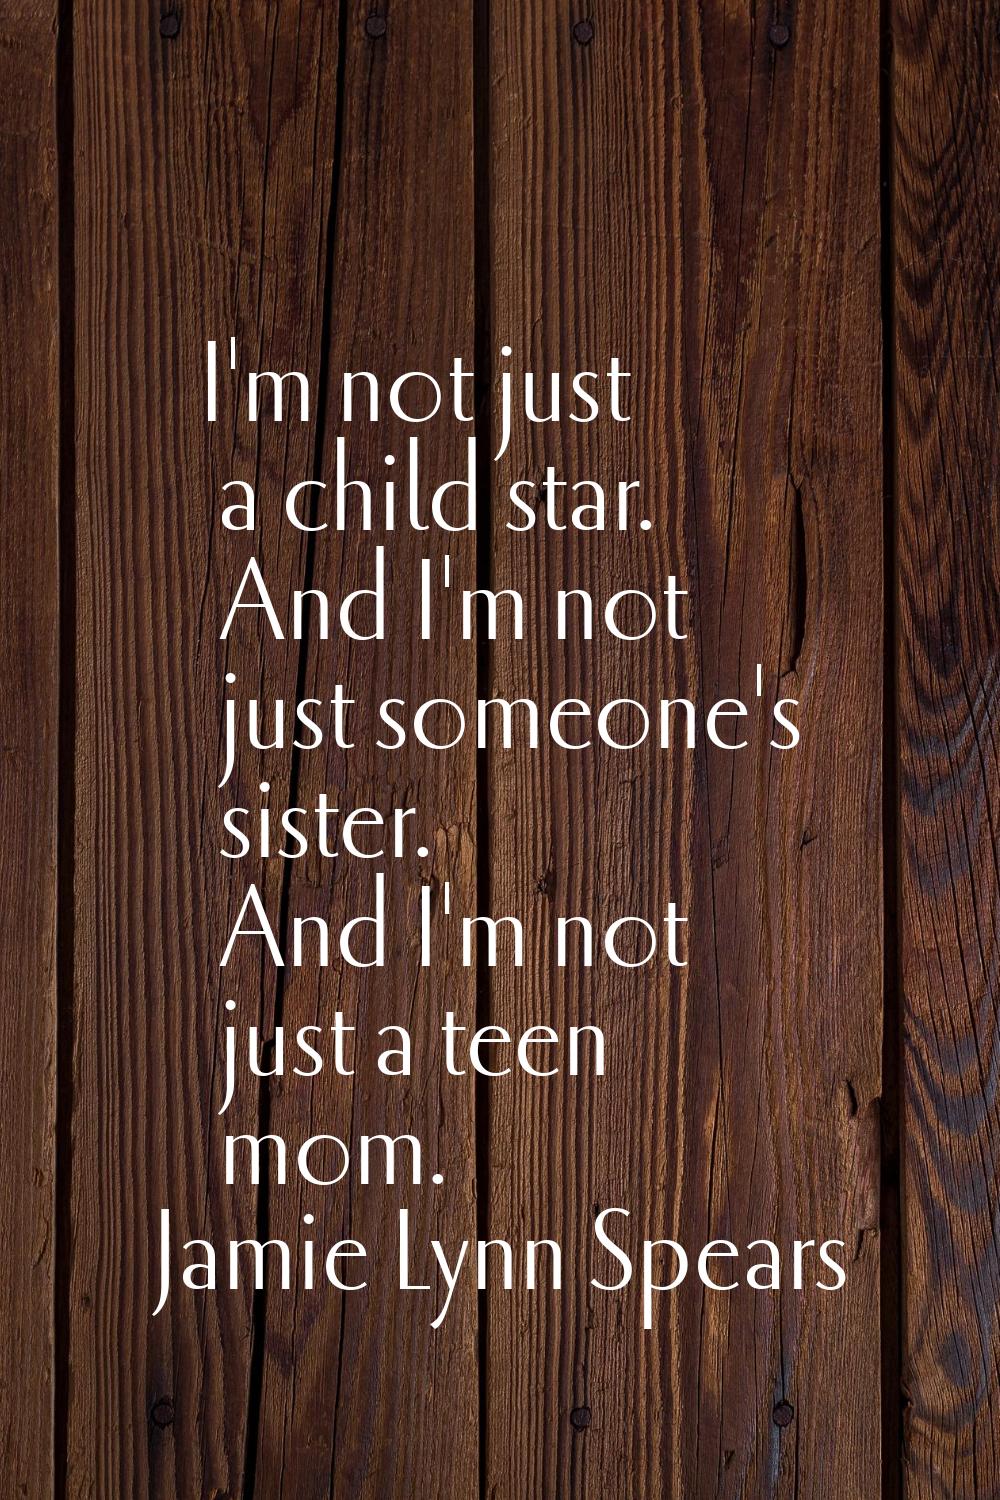 I'm not just a child star. And I'm not just someone's sister. And I'm not just a teen mom.